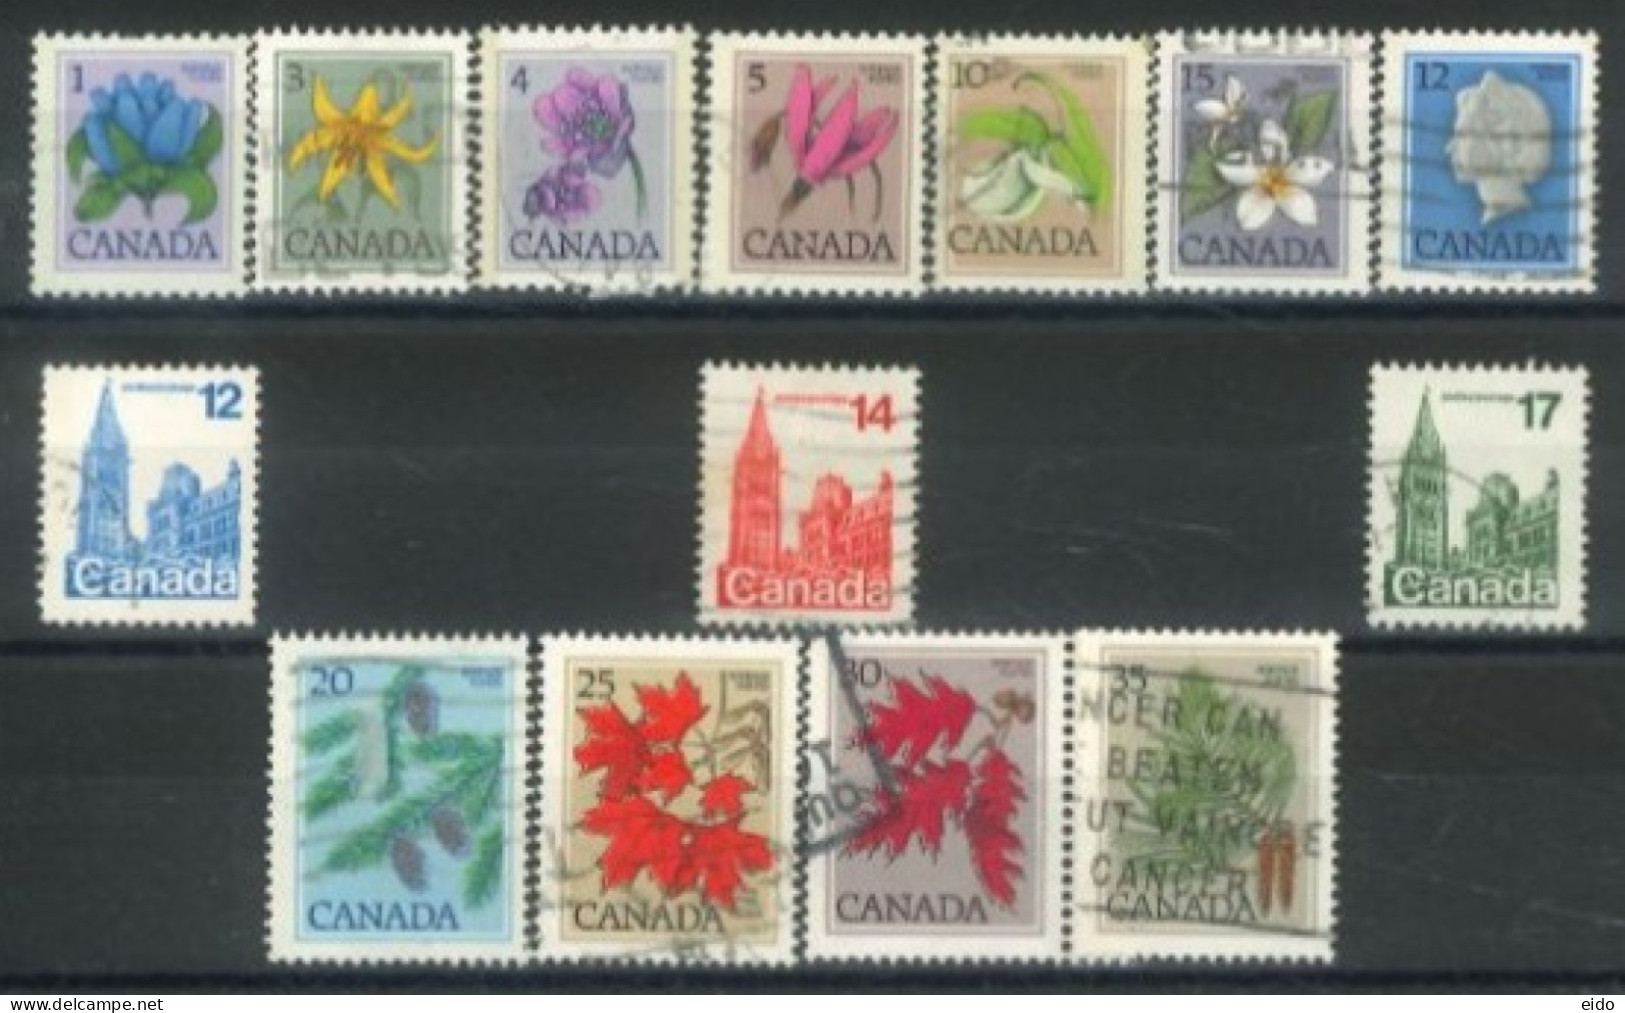 CANADA - 1977, QUEEN ELIZABETH II, HOUSE OF PARLIAMENT, FLOWERS & LEAVES STAMPS SET OF 14, USED. - Usados